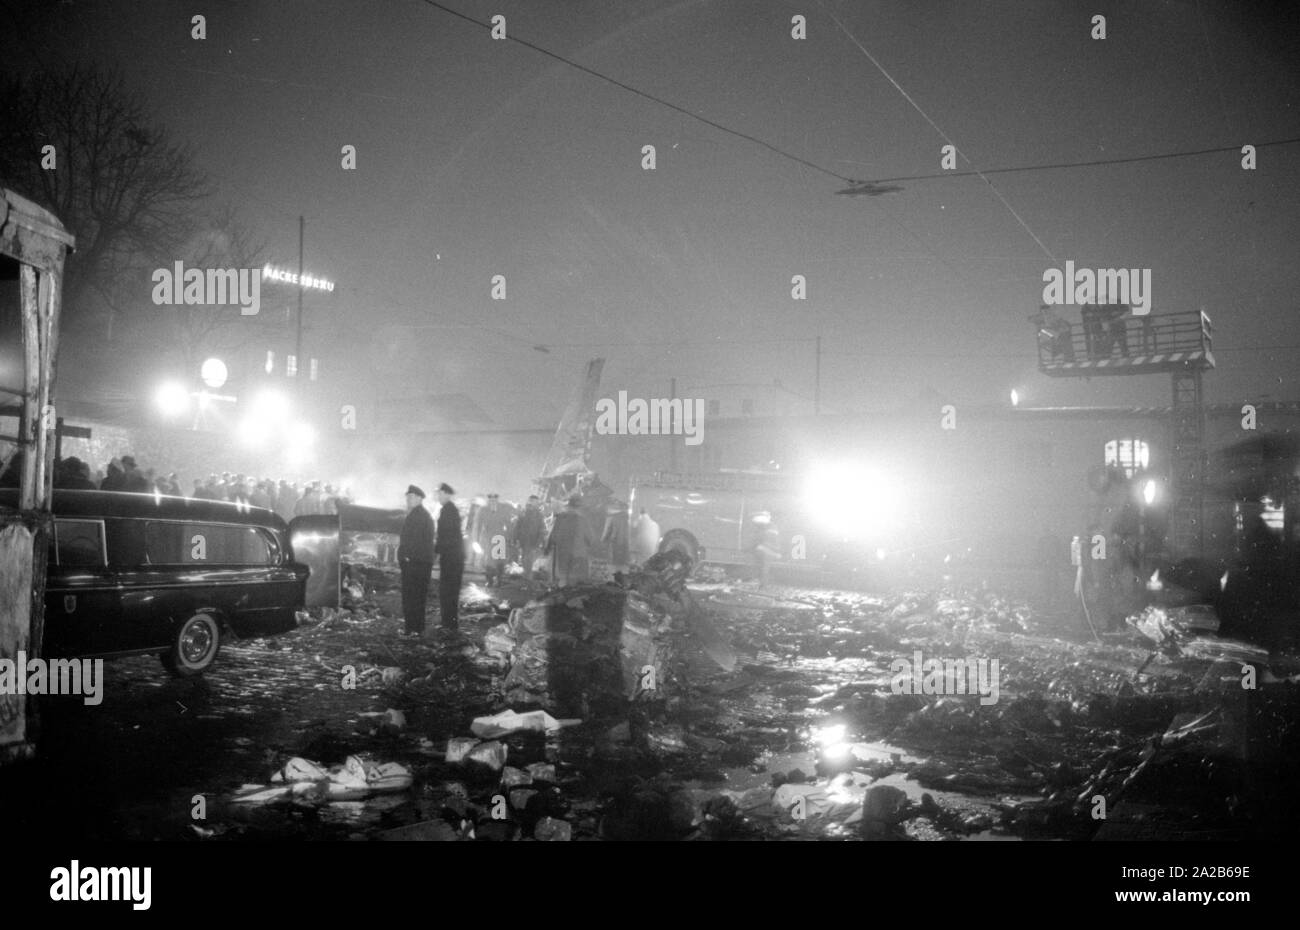 Shortly after the take off from the Munich-Riem Airport a US Air Force transport aircraft of the type Convair C-131-D Samaritan crashed in the area of Bayerstrasse / Martin-Greif Strasse on a tram. 52 people were killed. The picture shows the crash site illuminated with headlights, sightseers, relief forces and wreckage. On the left in the foreground is a hearse. Stock Photo